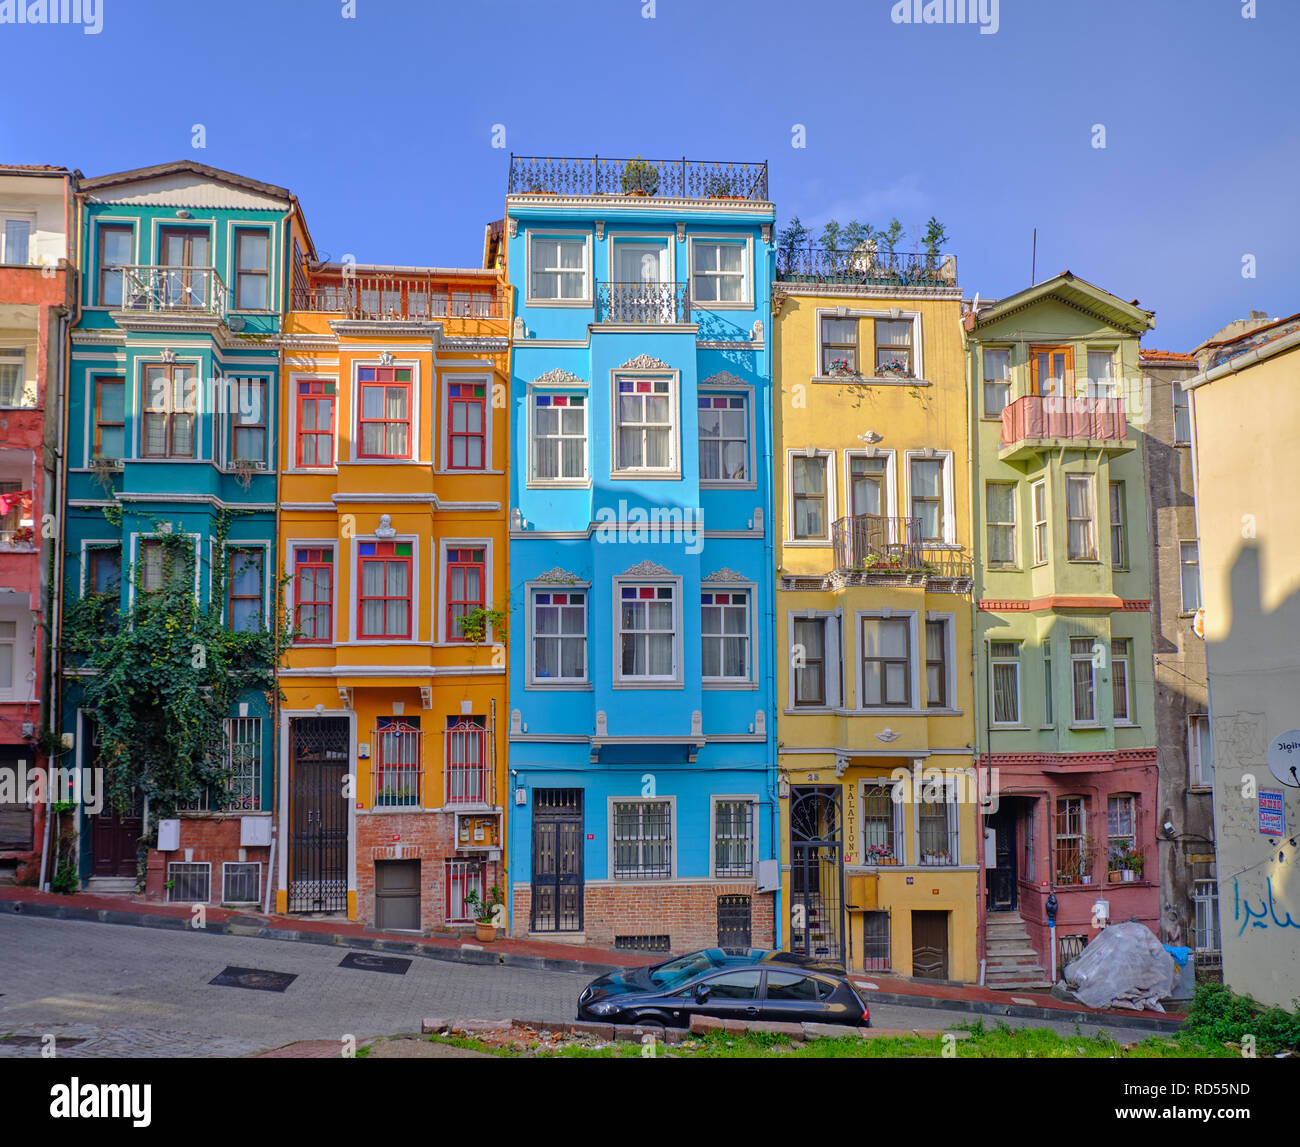 Istanbul, Turkey - Colorful houses in the streets of Balat